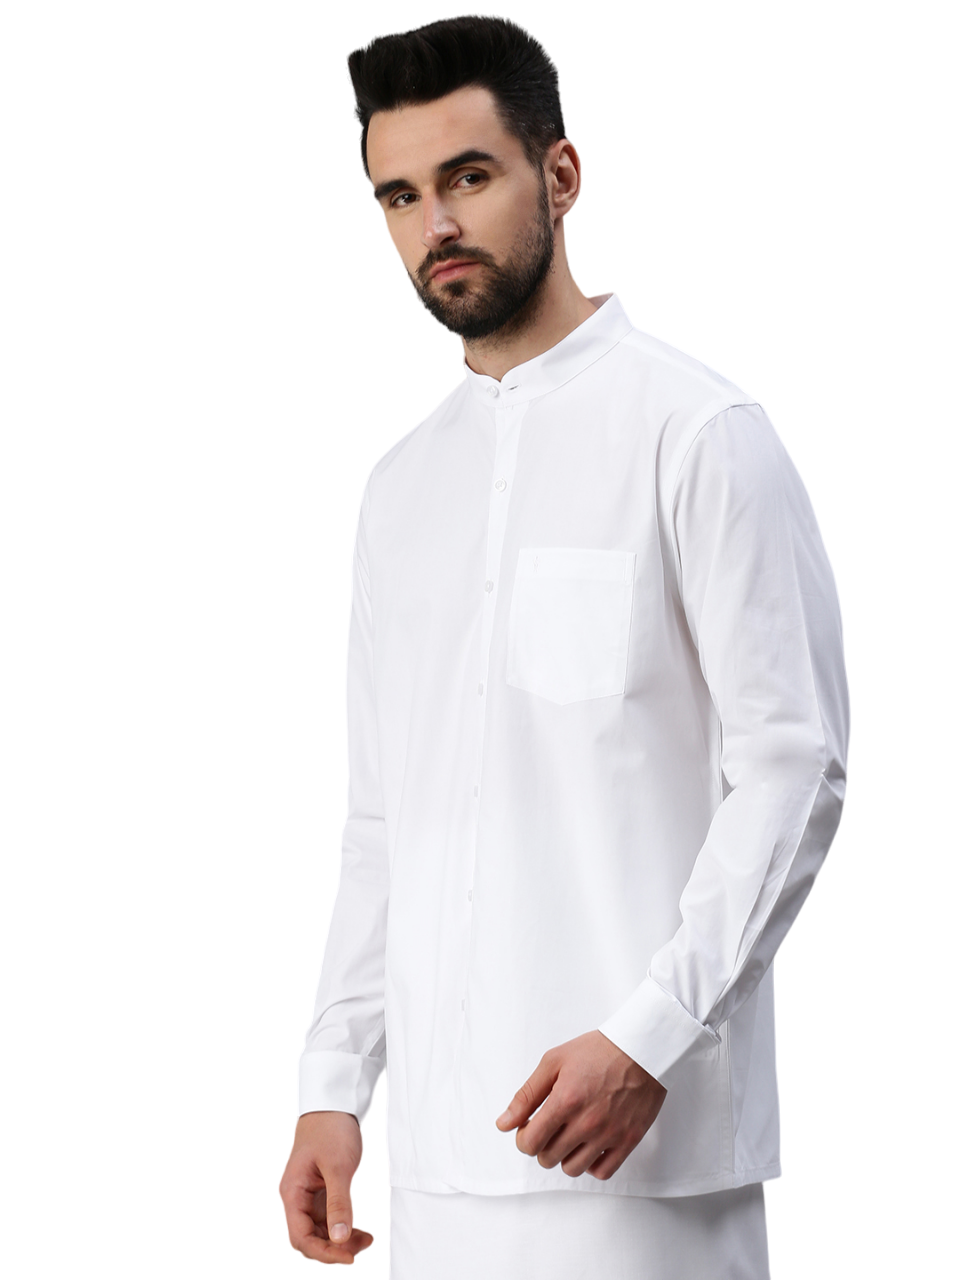 Mens 100% Cotton White Shirt Full Sleeves Chinese Collar-Side view